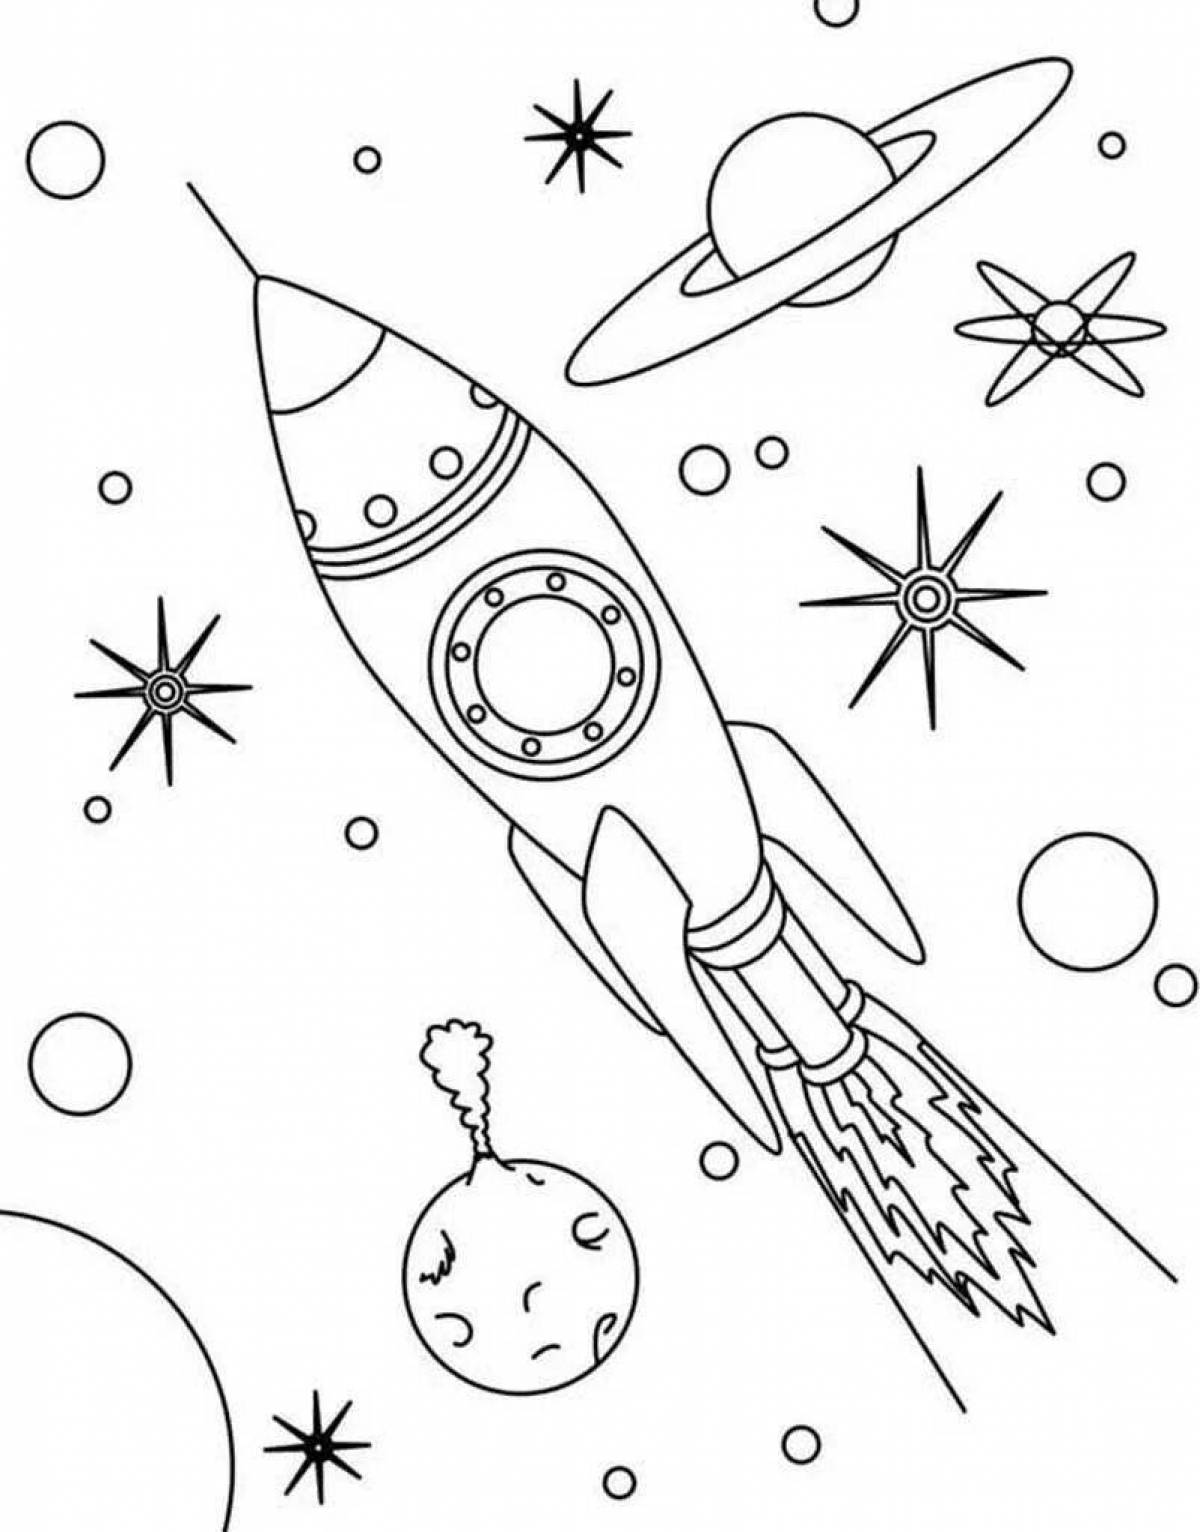 Amazing rocket drawing for kids